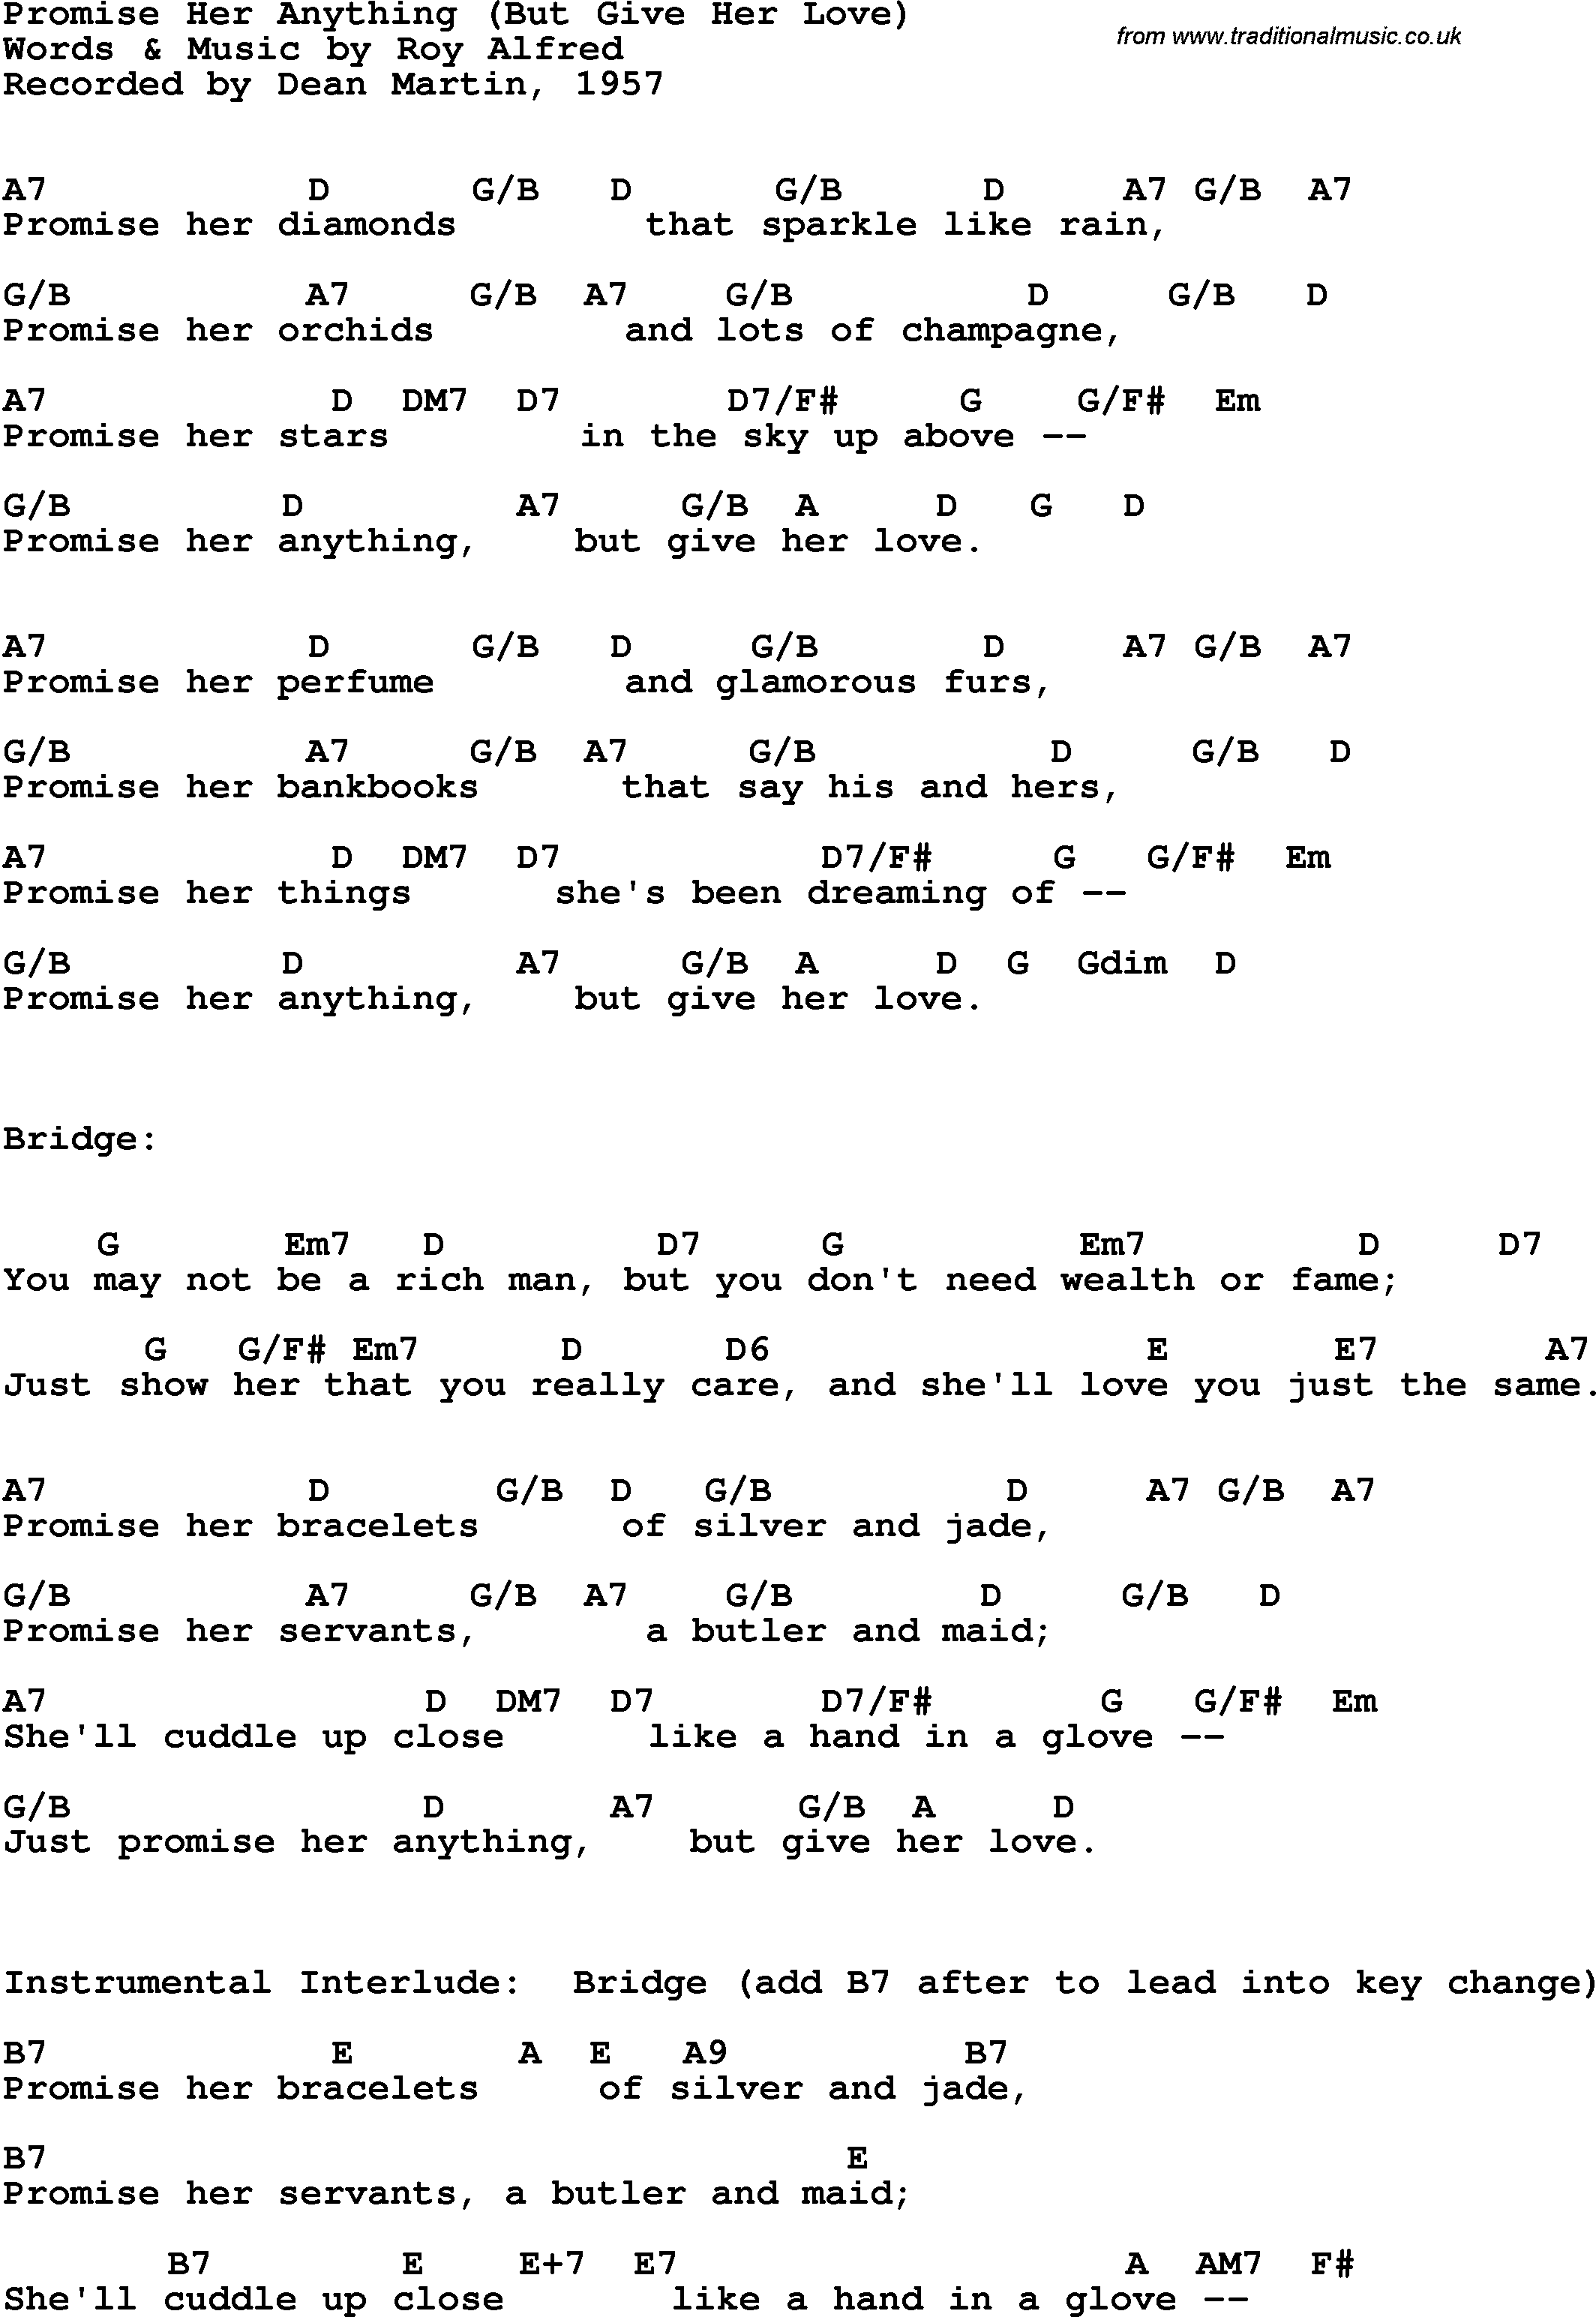 Song Lyrics with guitar chords for Promise Her Anything - Dean Martin, 1957